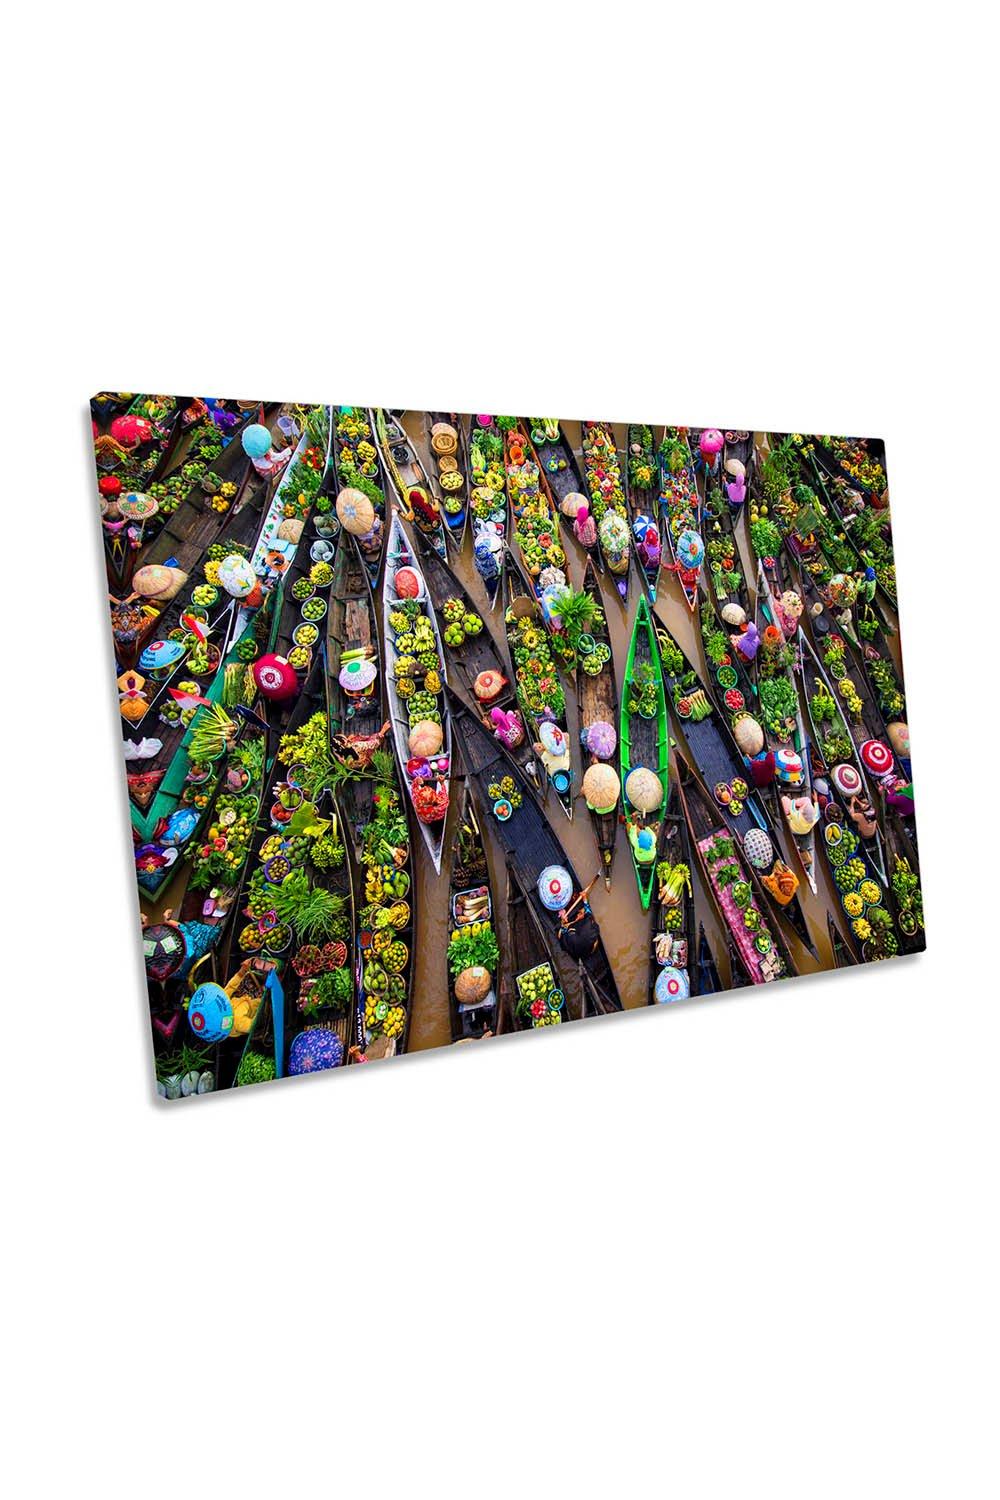 Pasar Terapung Floating Market Canvas Wall Art Picture Print